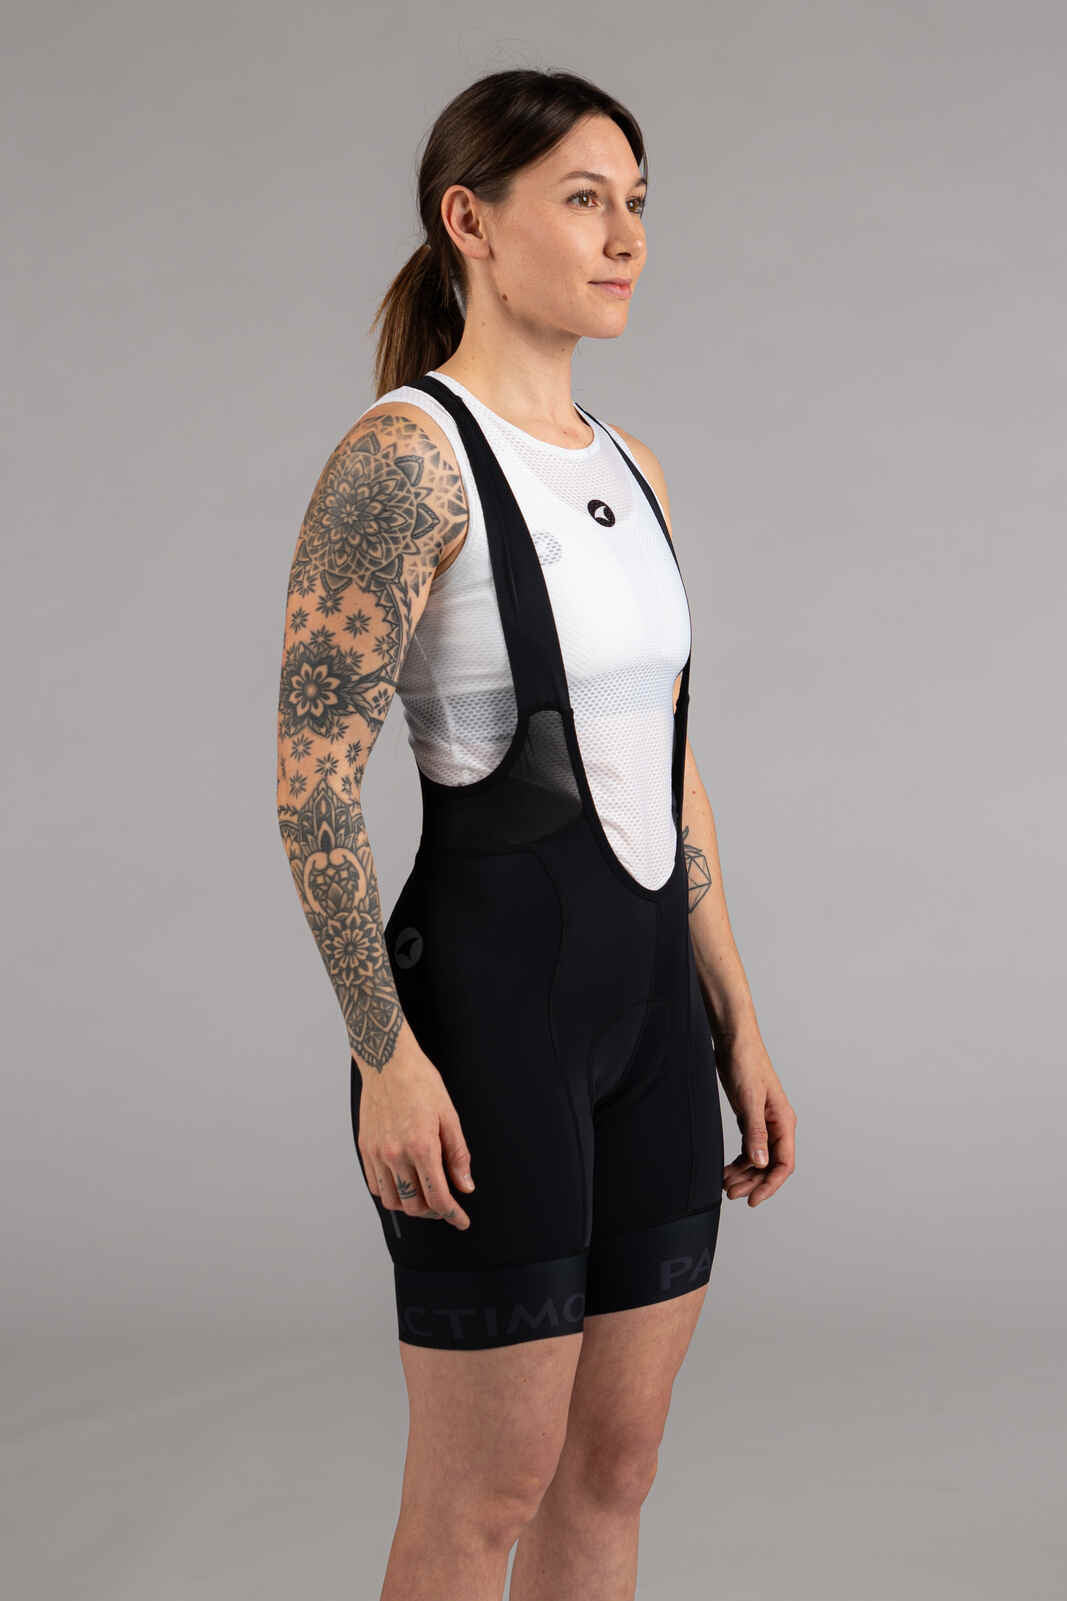 Women's Cycling Bibs - Ascent Vector Front View